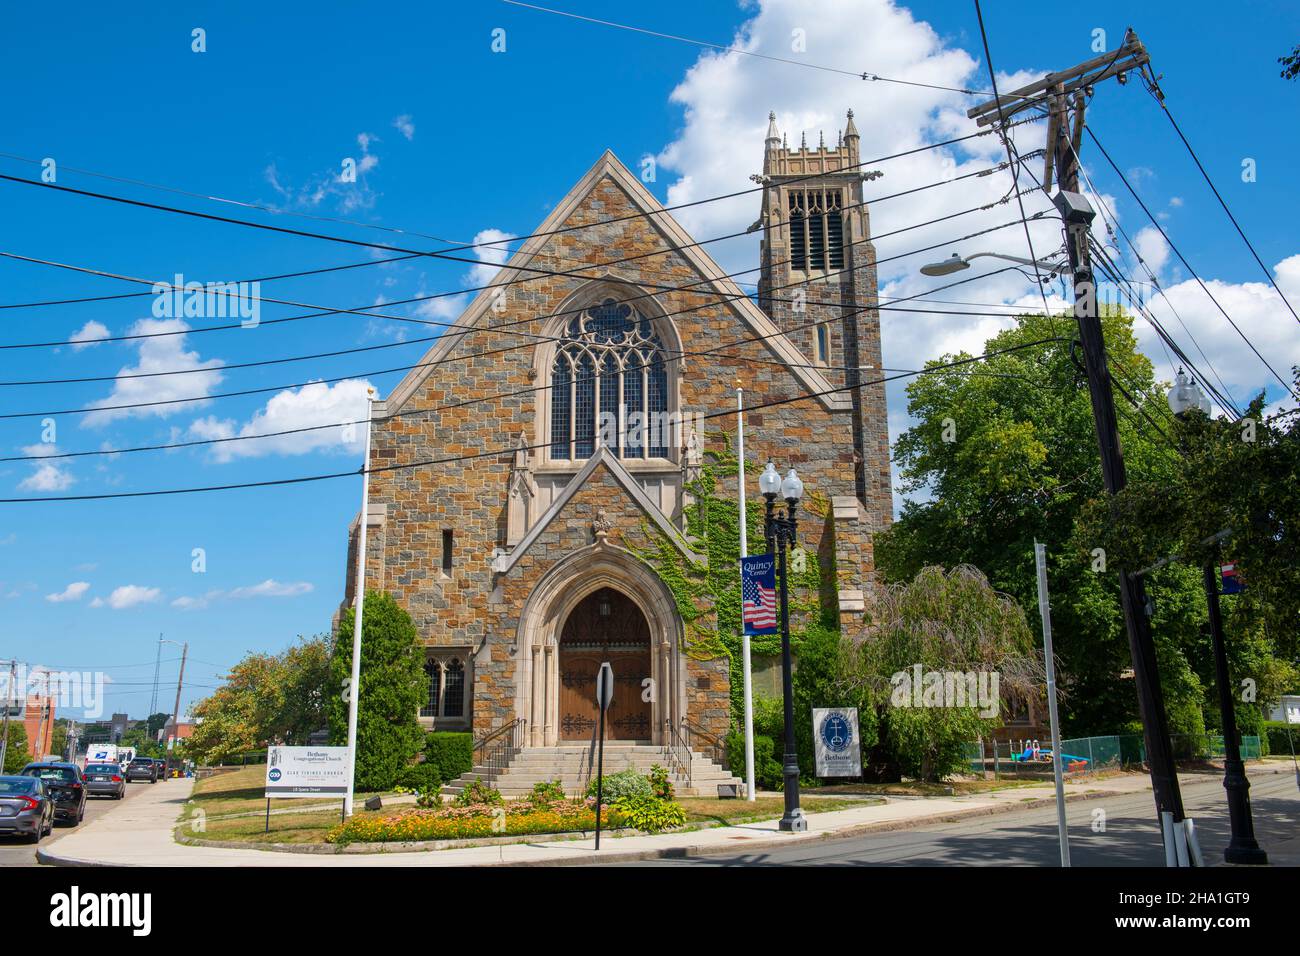 Bethany Congregational church at 18 Spear Street in Quincy, Massachusetts MA, USA. Stock Photo